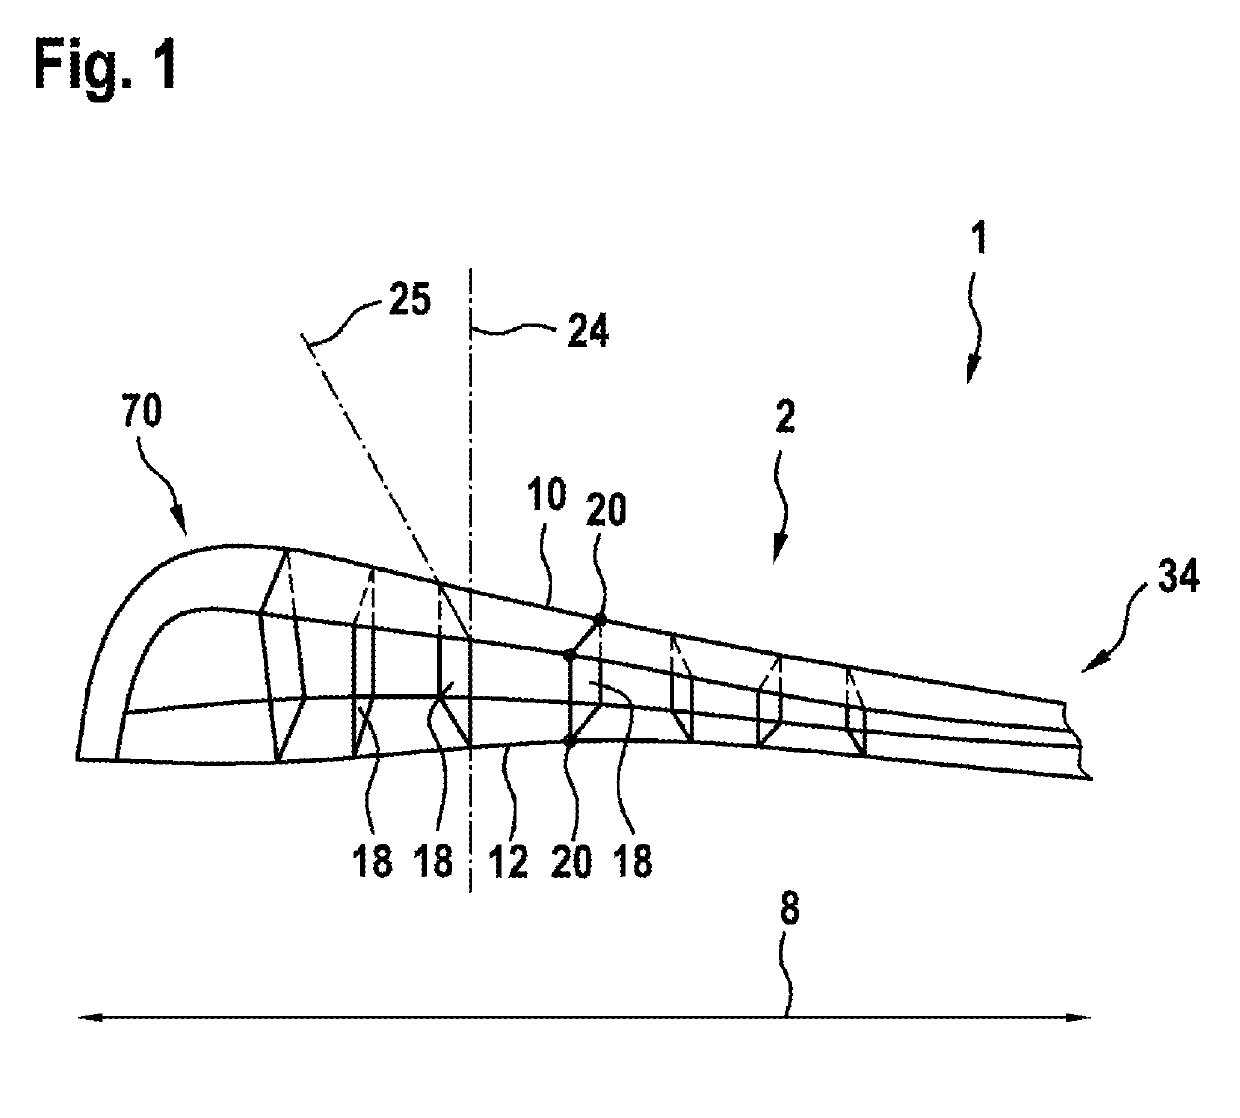 Fin ray-type wiper comprising a flexible structure optimized for demolding